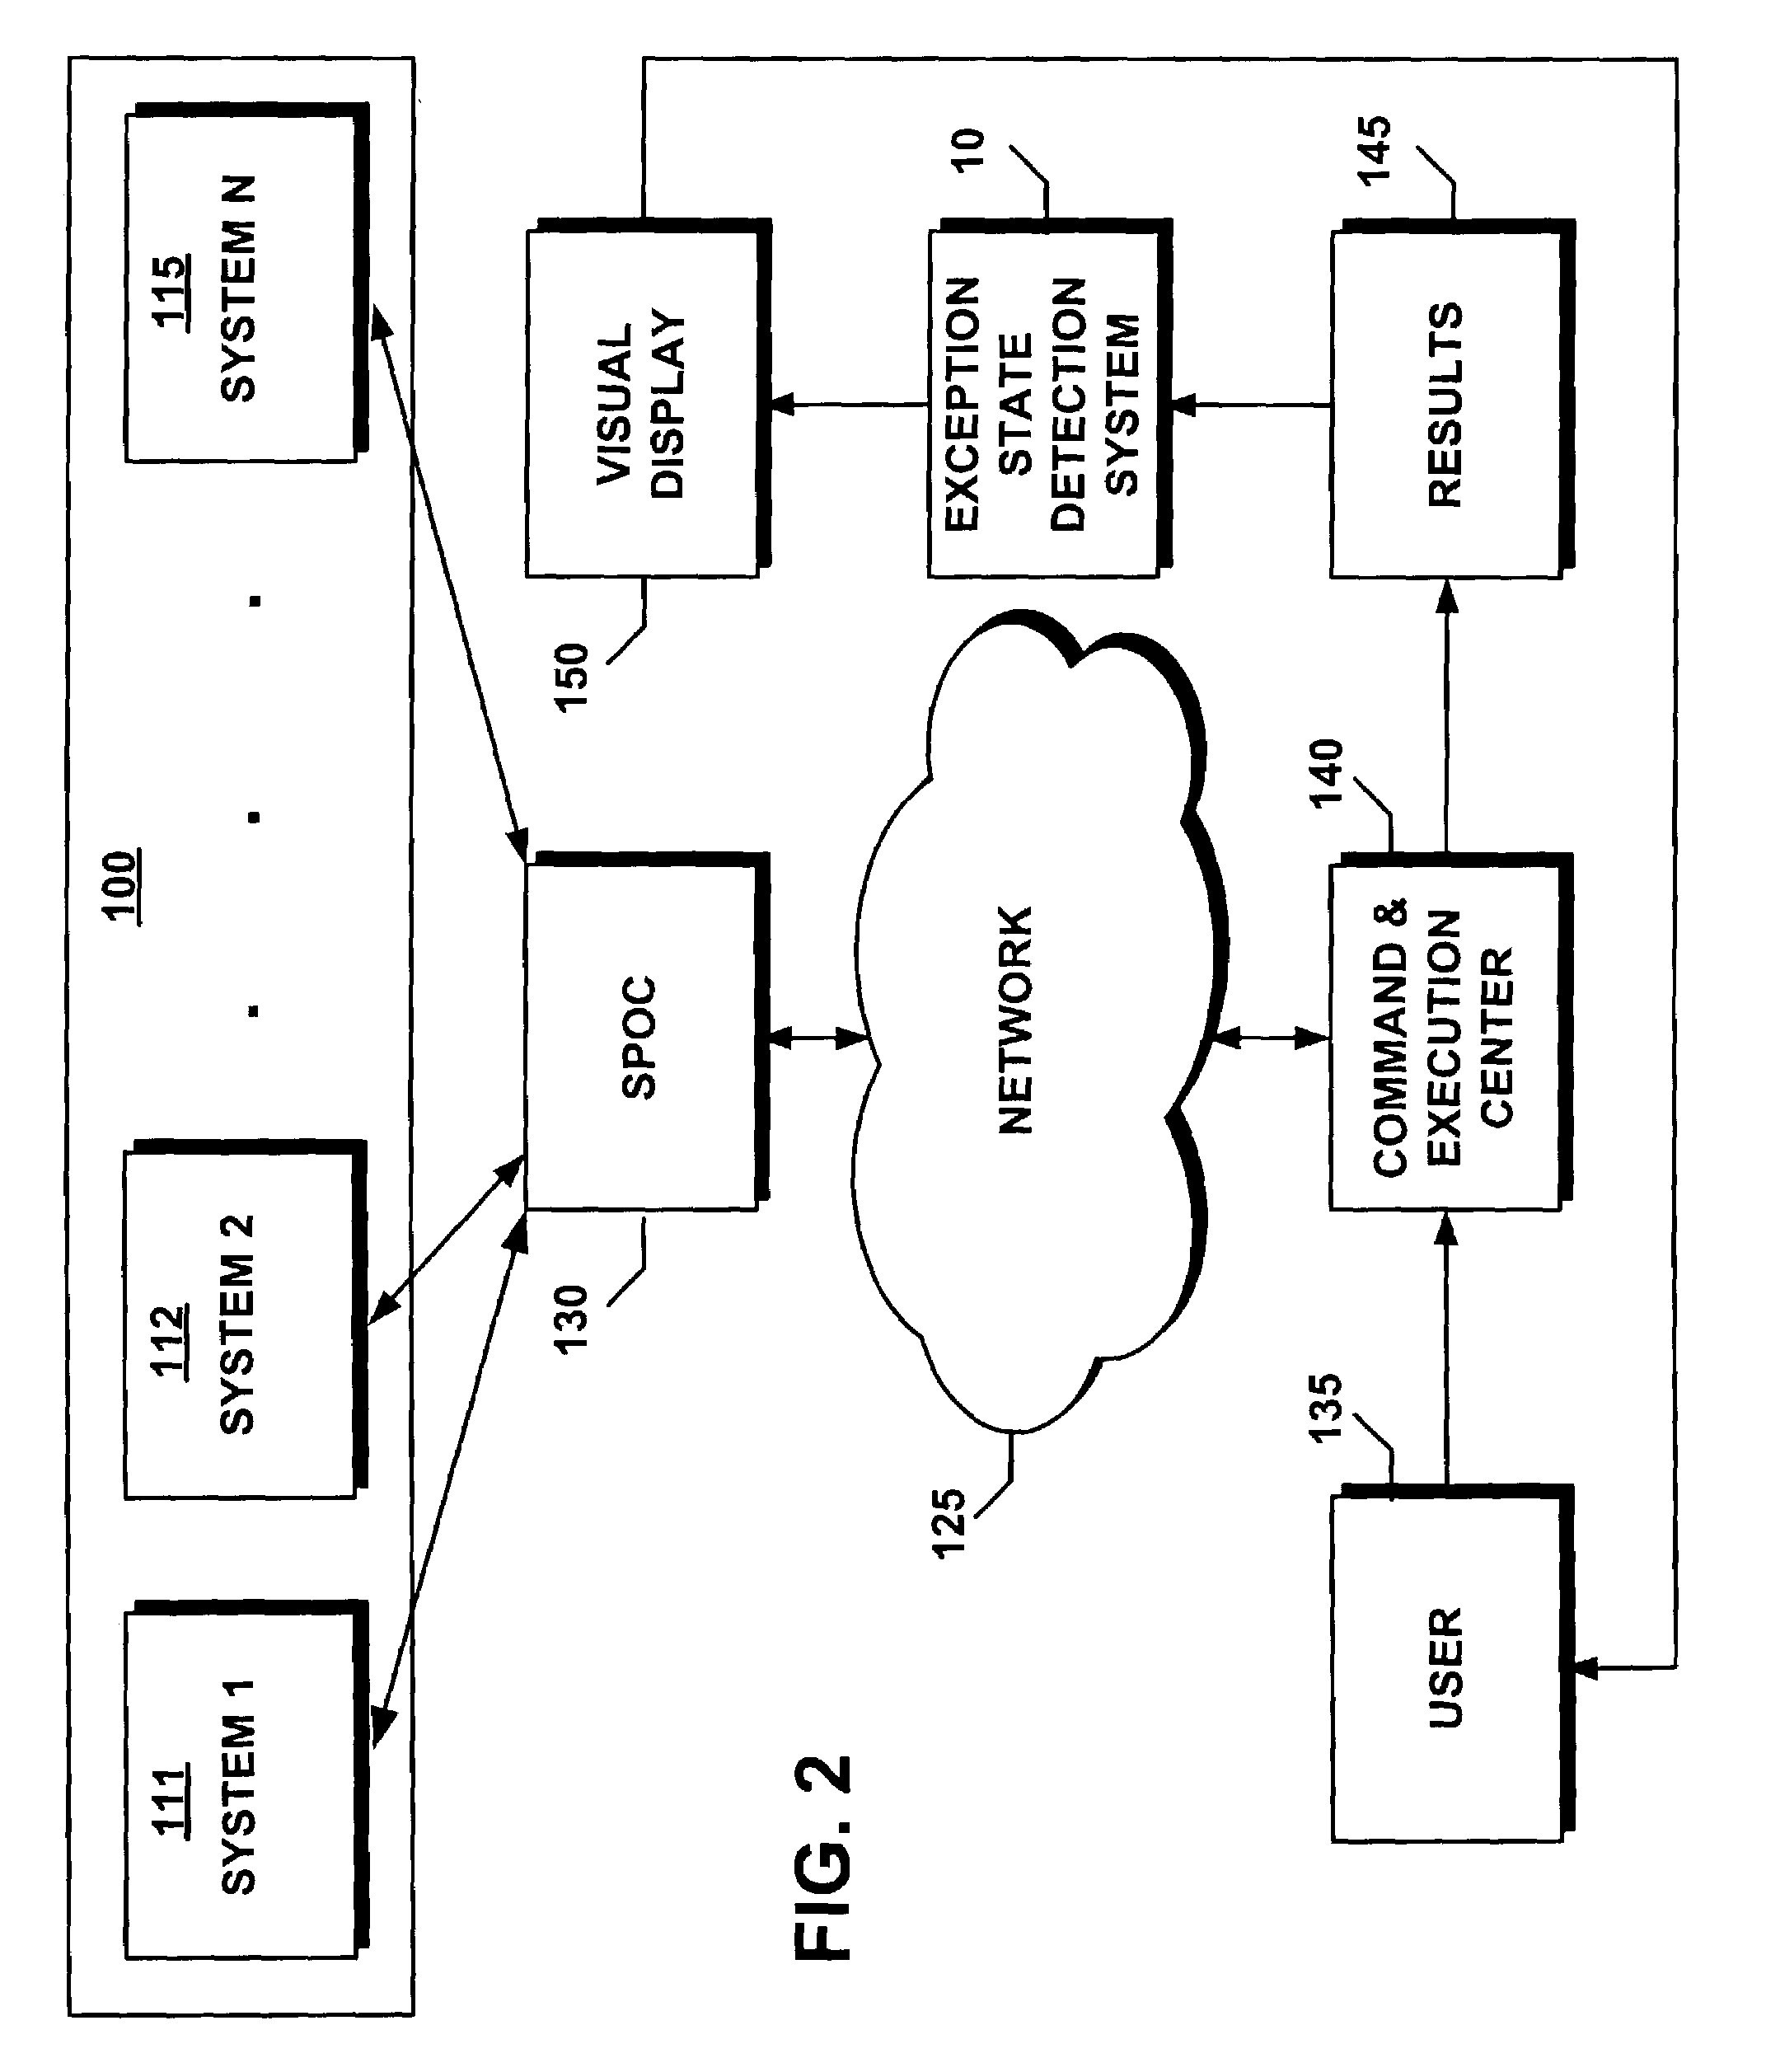 Method for flagging differences in resource attributes across multiple database and transaction systems